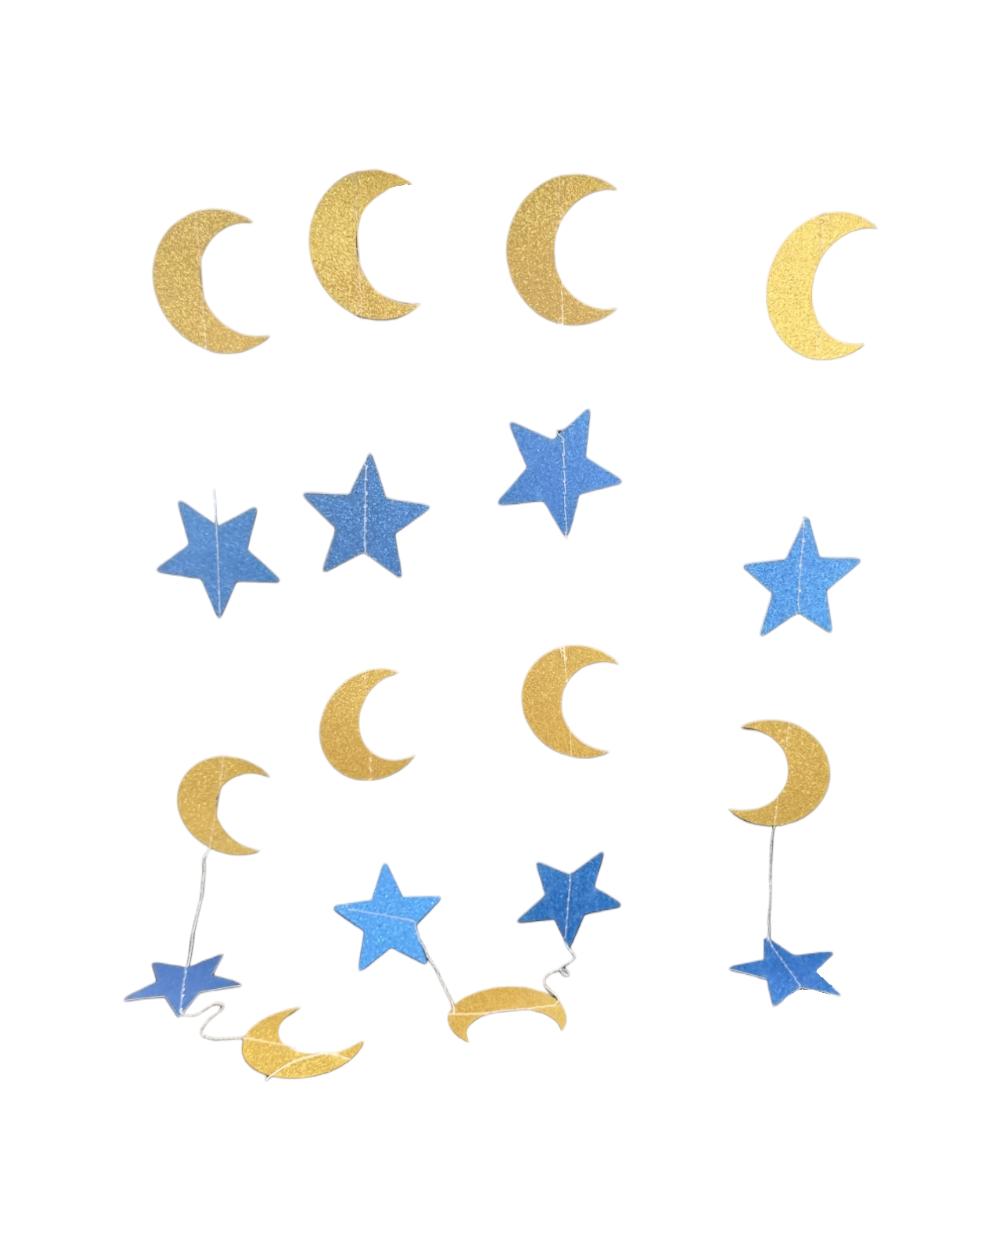 Moons and stars banner - Blue and gold